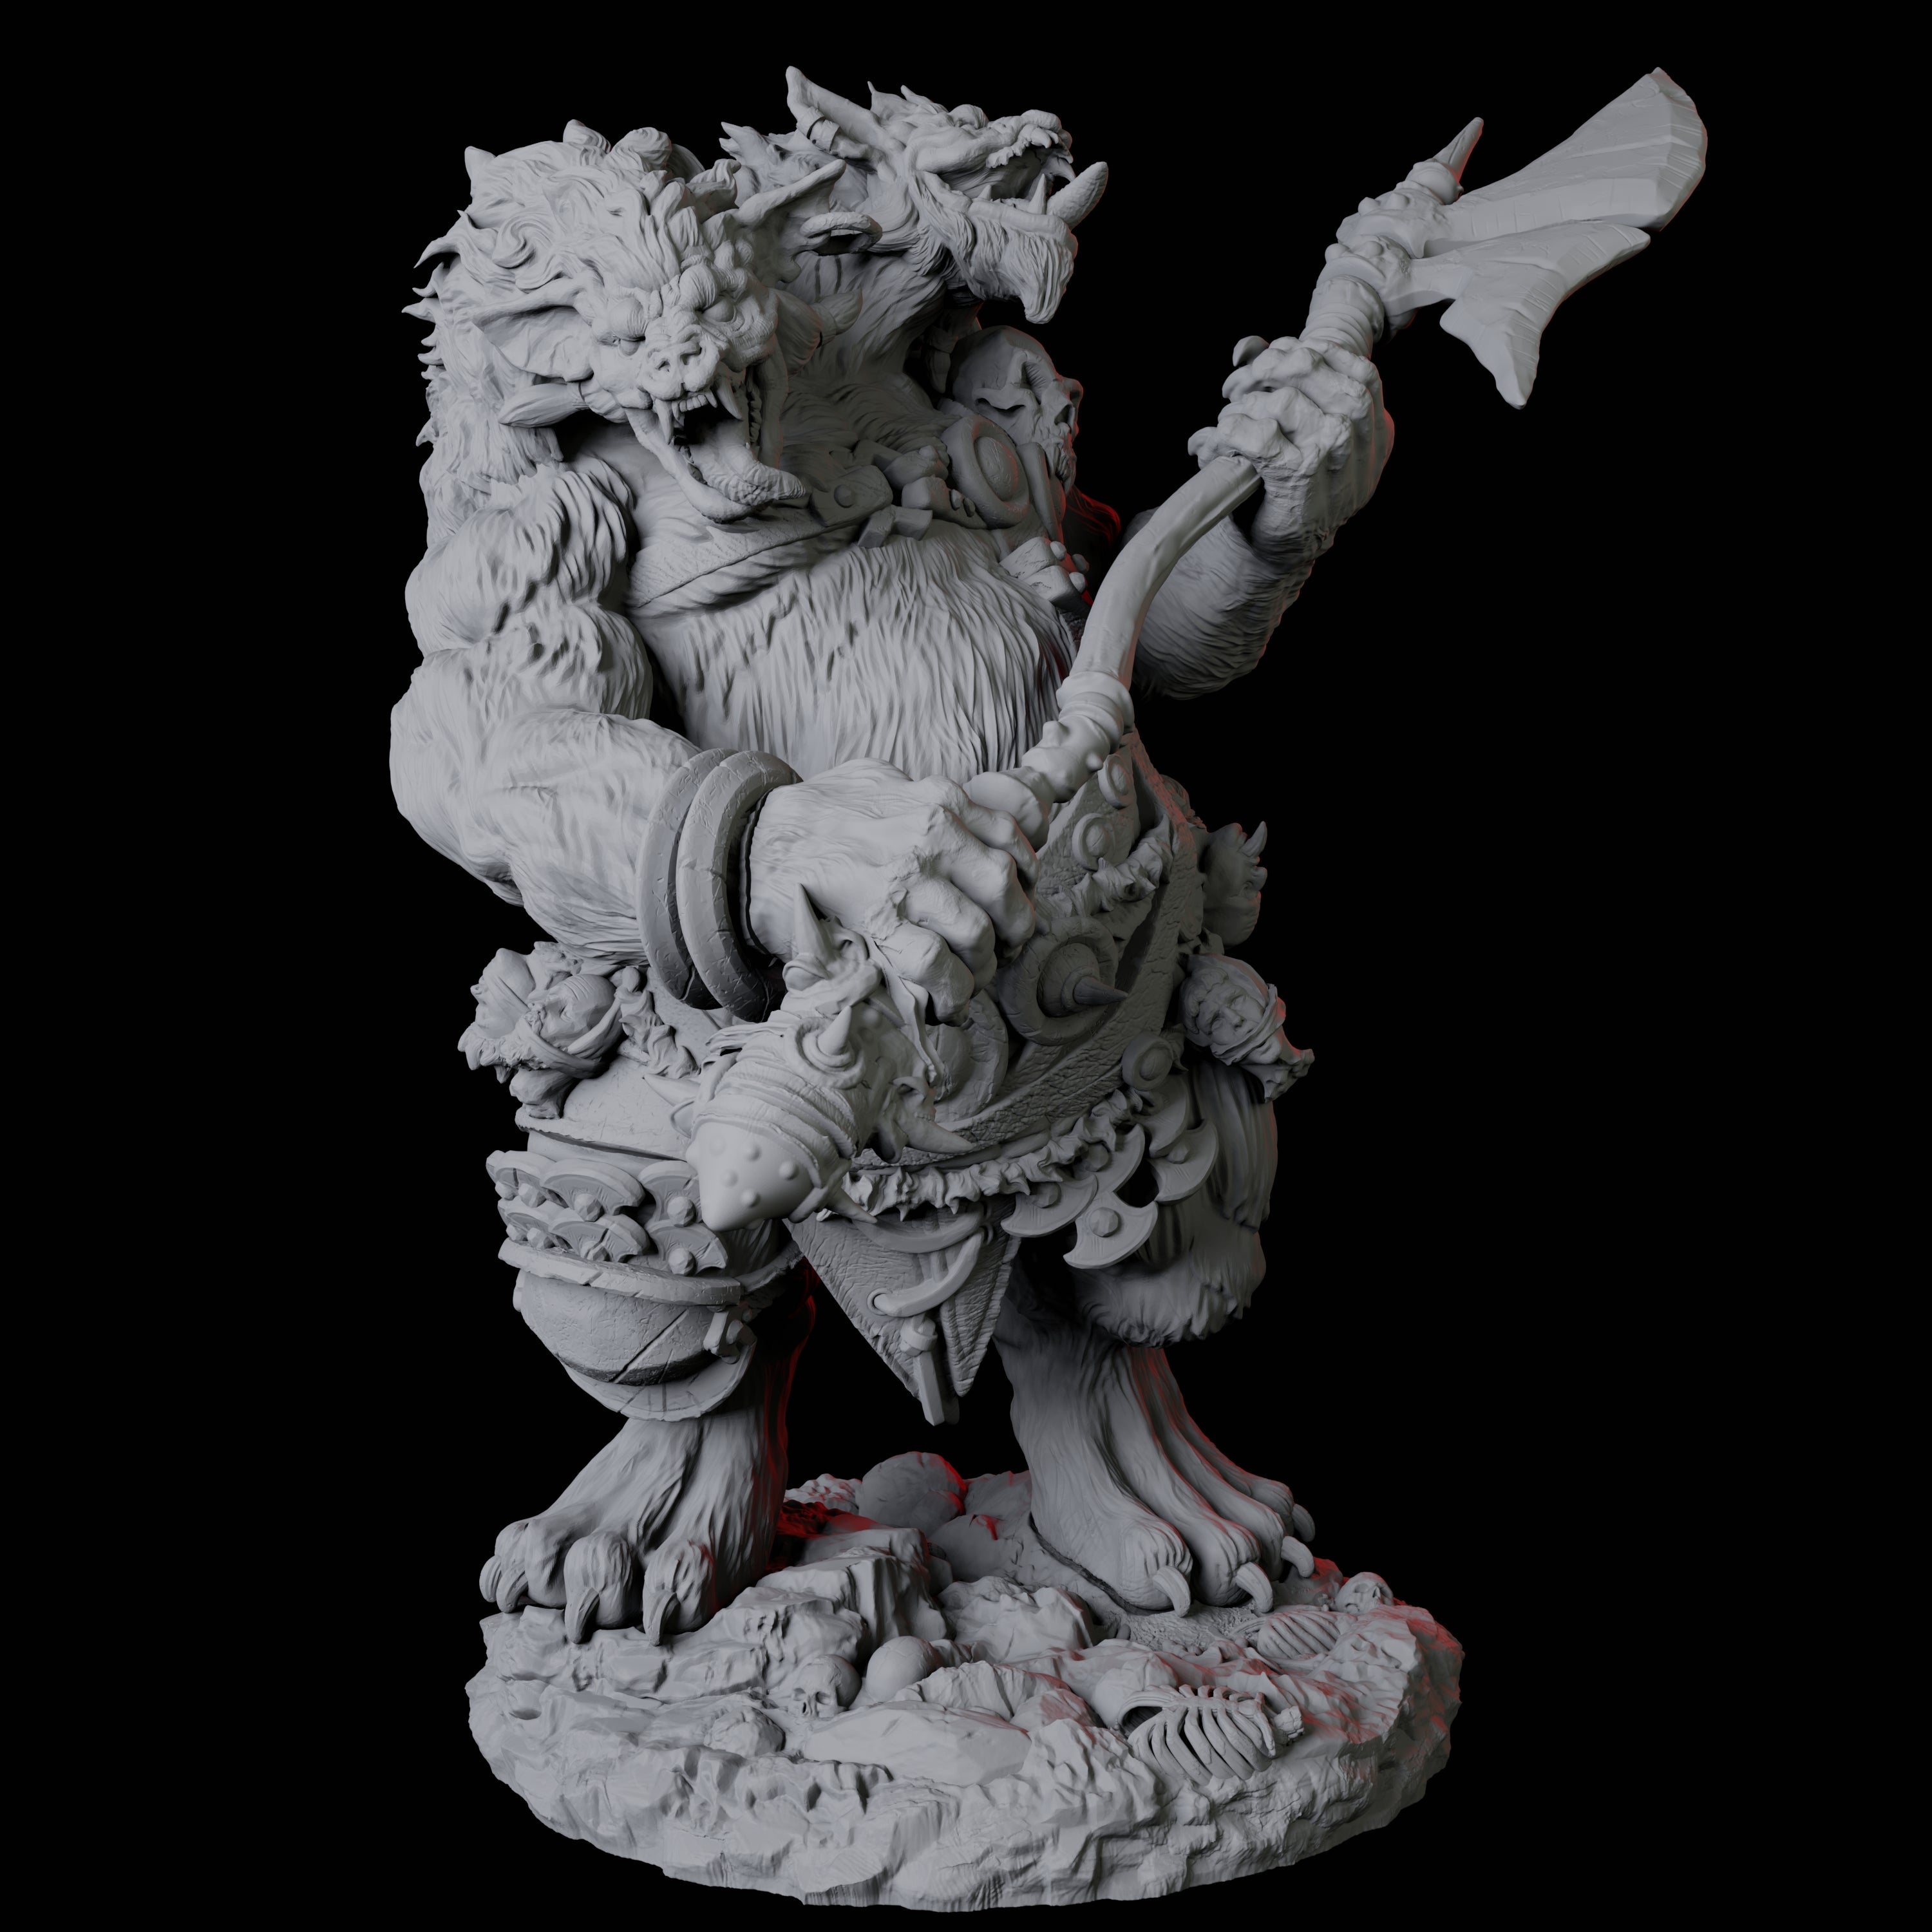 Gnoll Ettin A Miniature for Dungeons and Dragons, Pathfinder or other TTRPGs